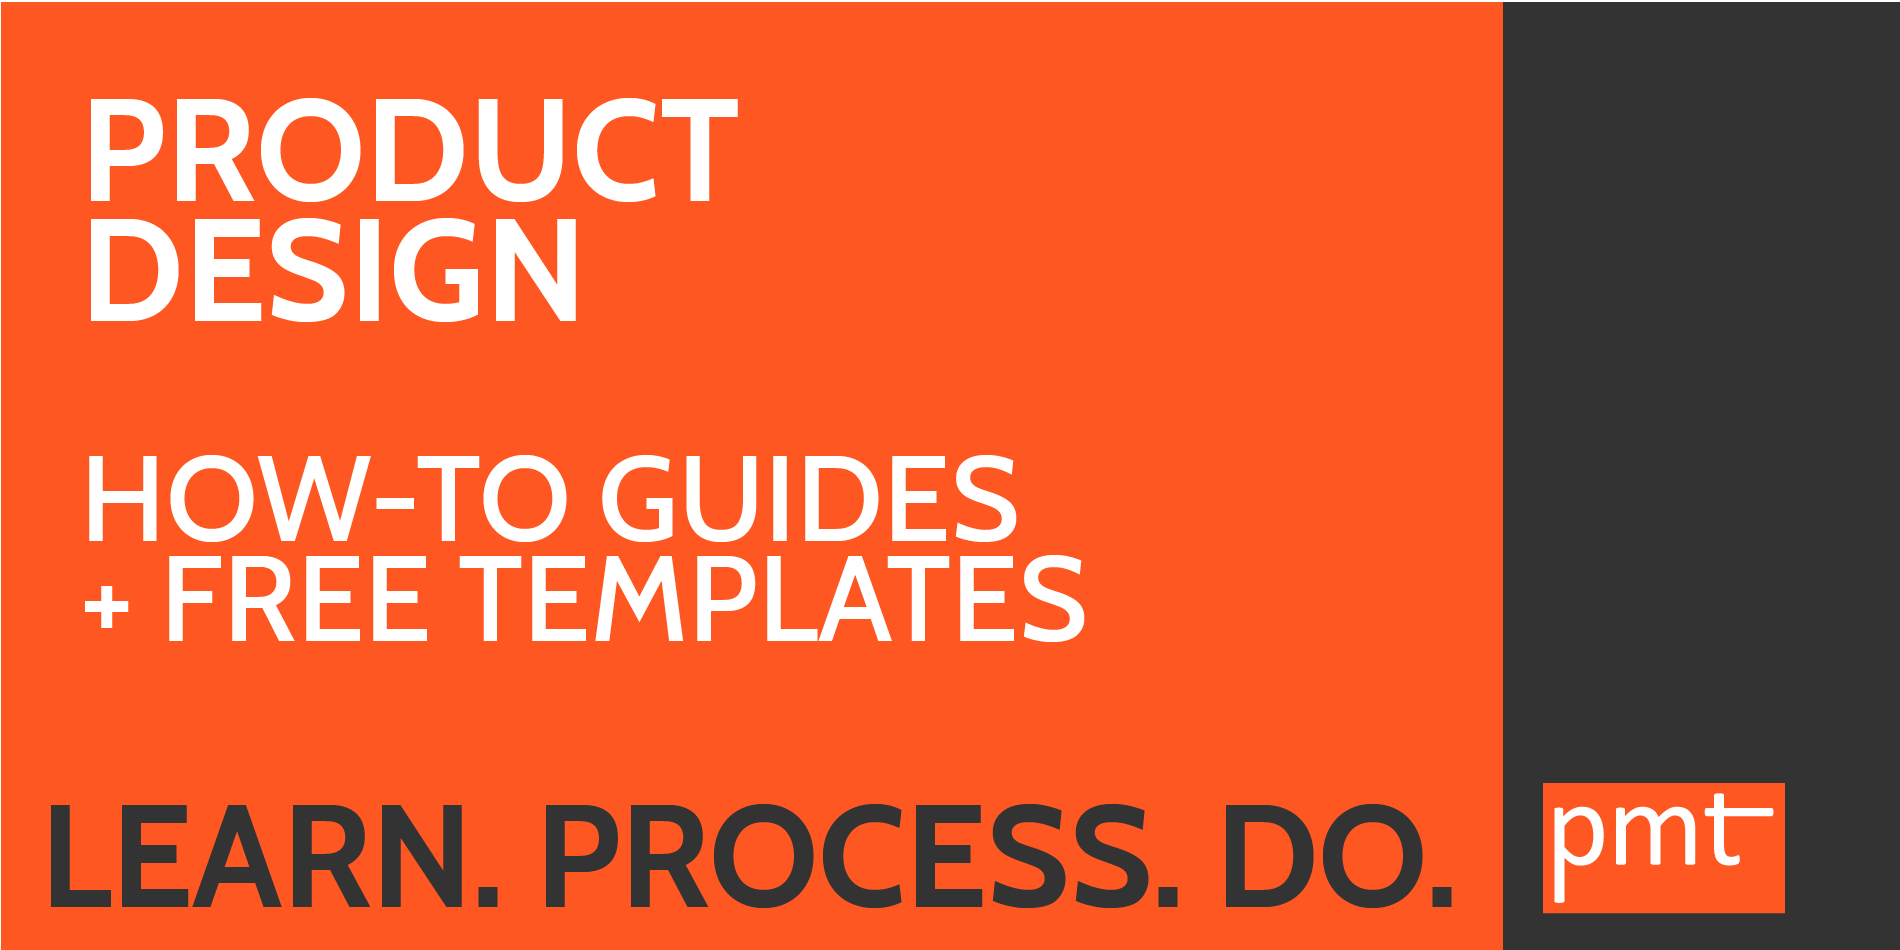 how to guides + free templates by Polina Tarnopolsky